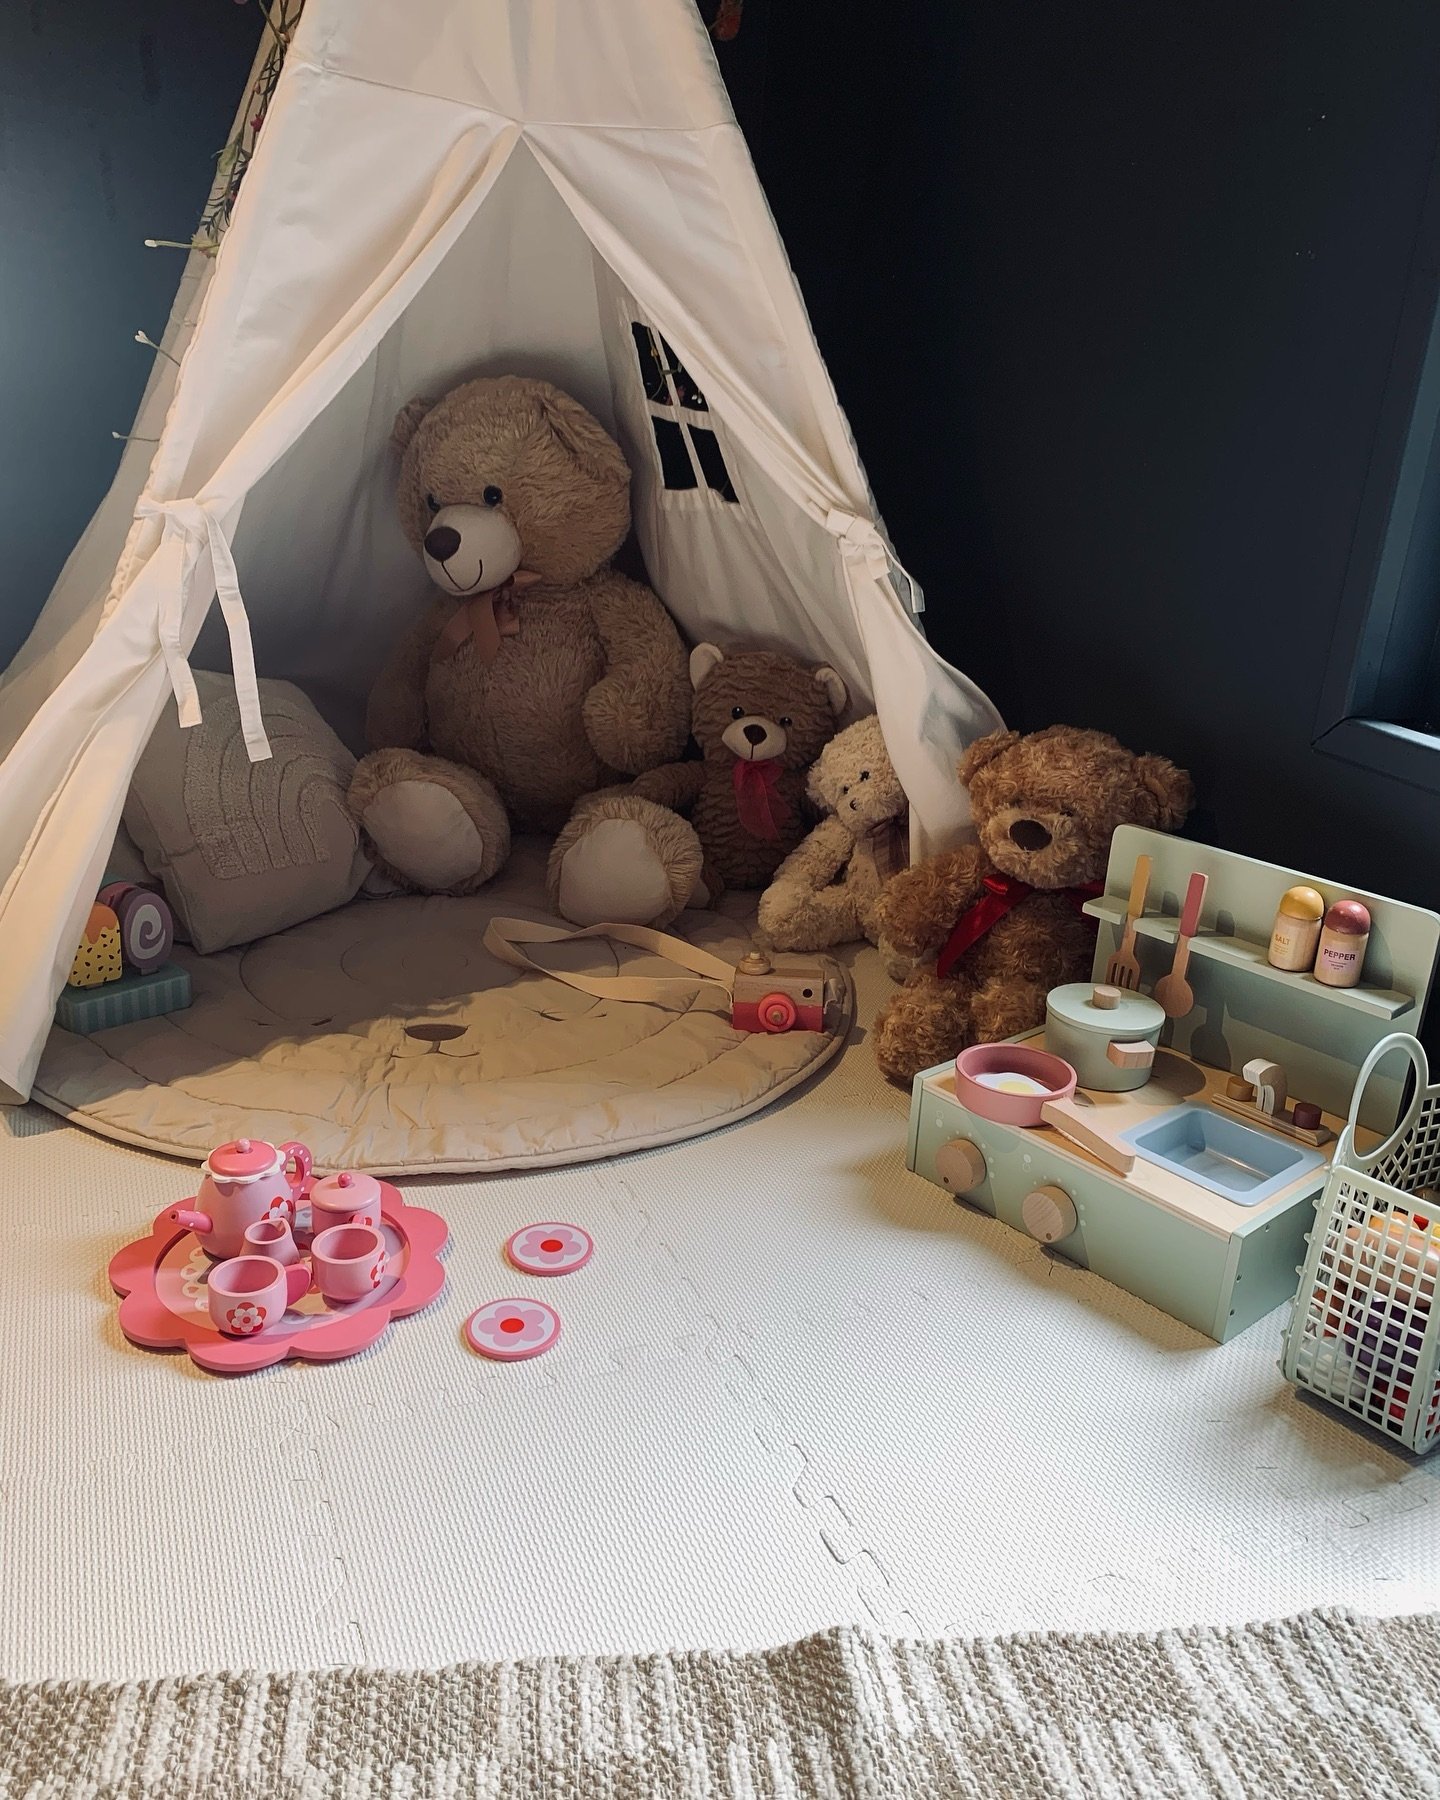 In nearly all of our packages for weddings, christenings, birthdays, events or messy play, we include our teepee set up with a mix of toys suitable for a mix of age ranges and interests 🌈⁣
⁣
📍 North Herts/South Beds/St Albans⁣
⁣
⁣
⁣
⁣
⁣
#weddingcre